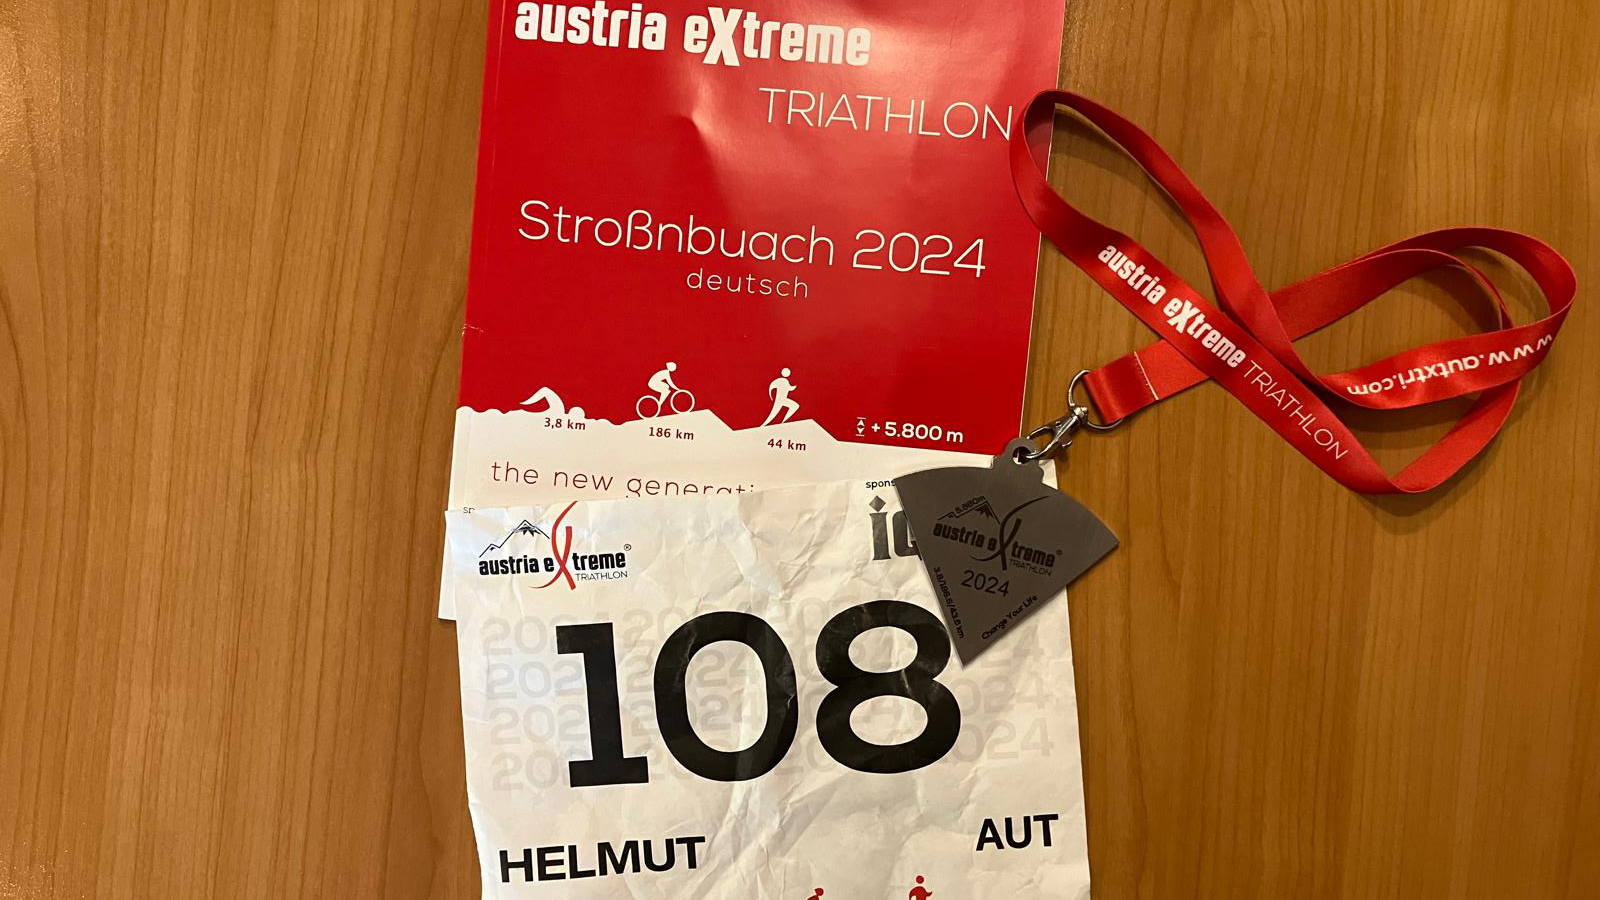 Featured image for “Austria Extreme”